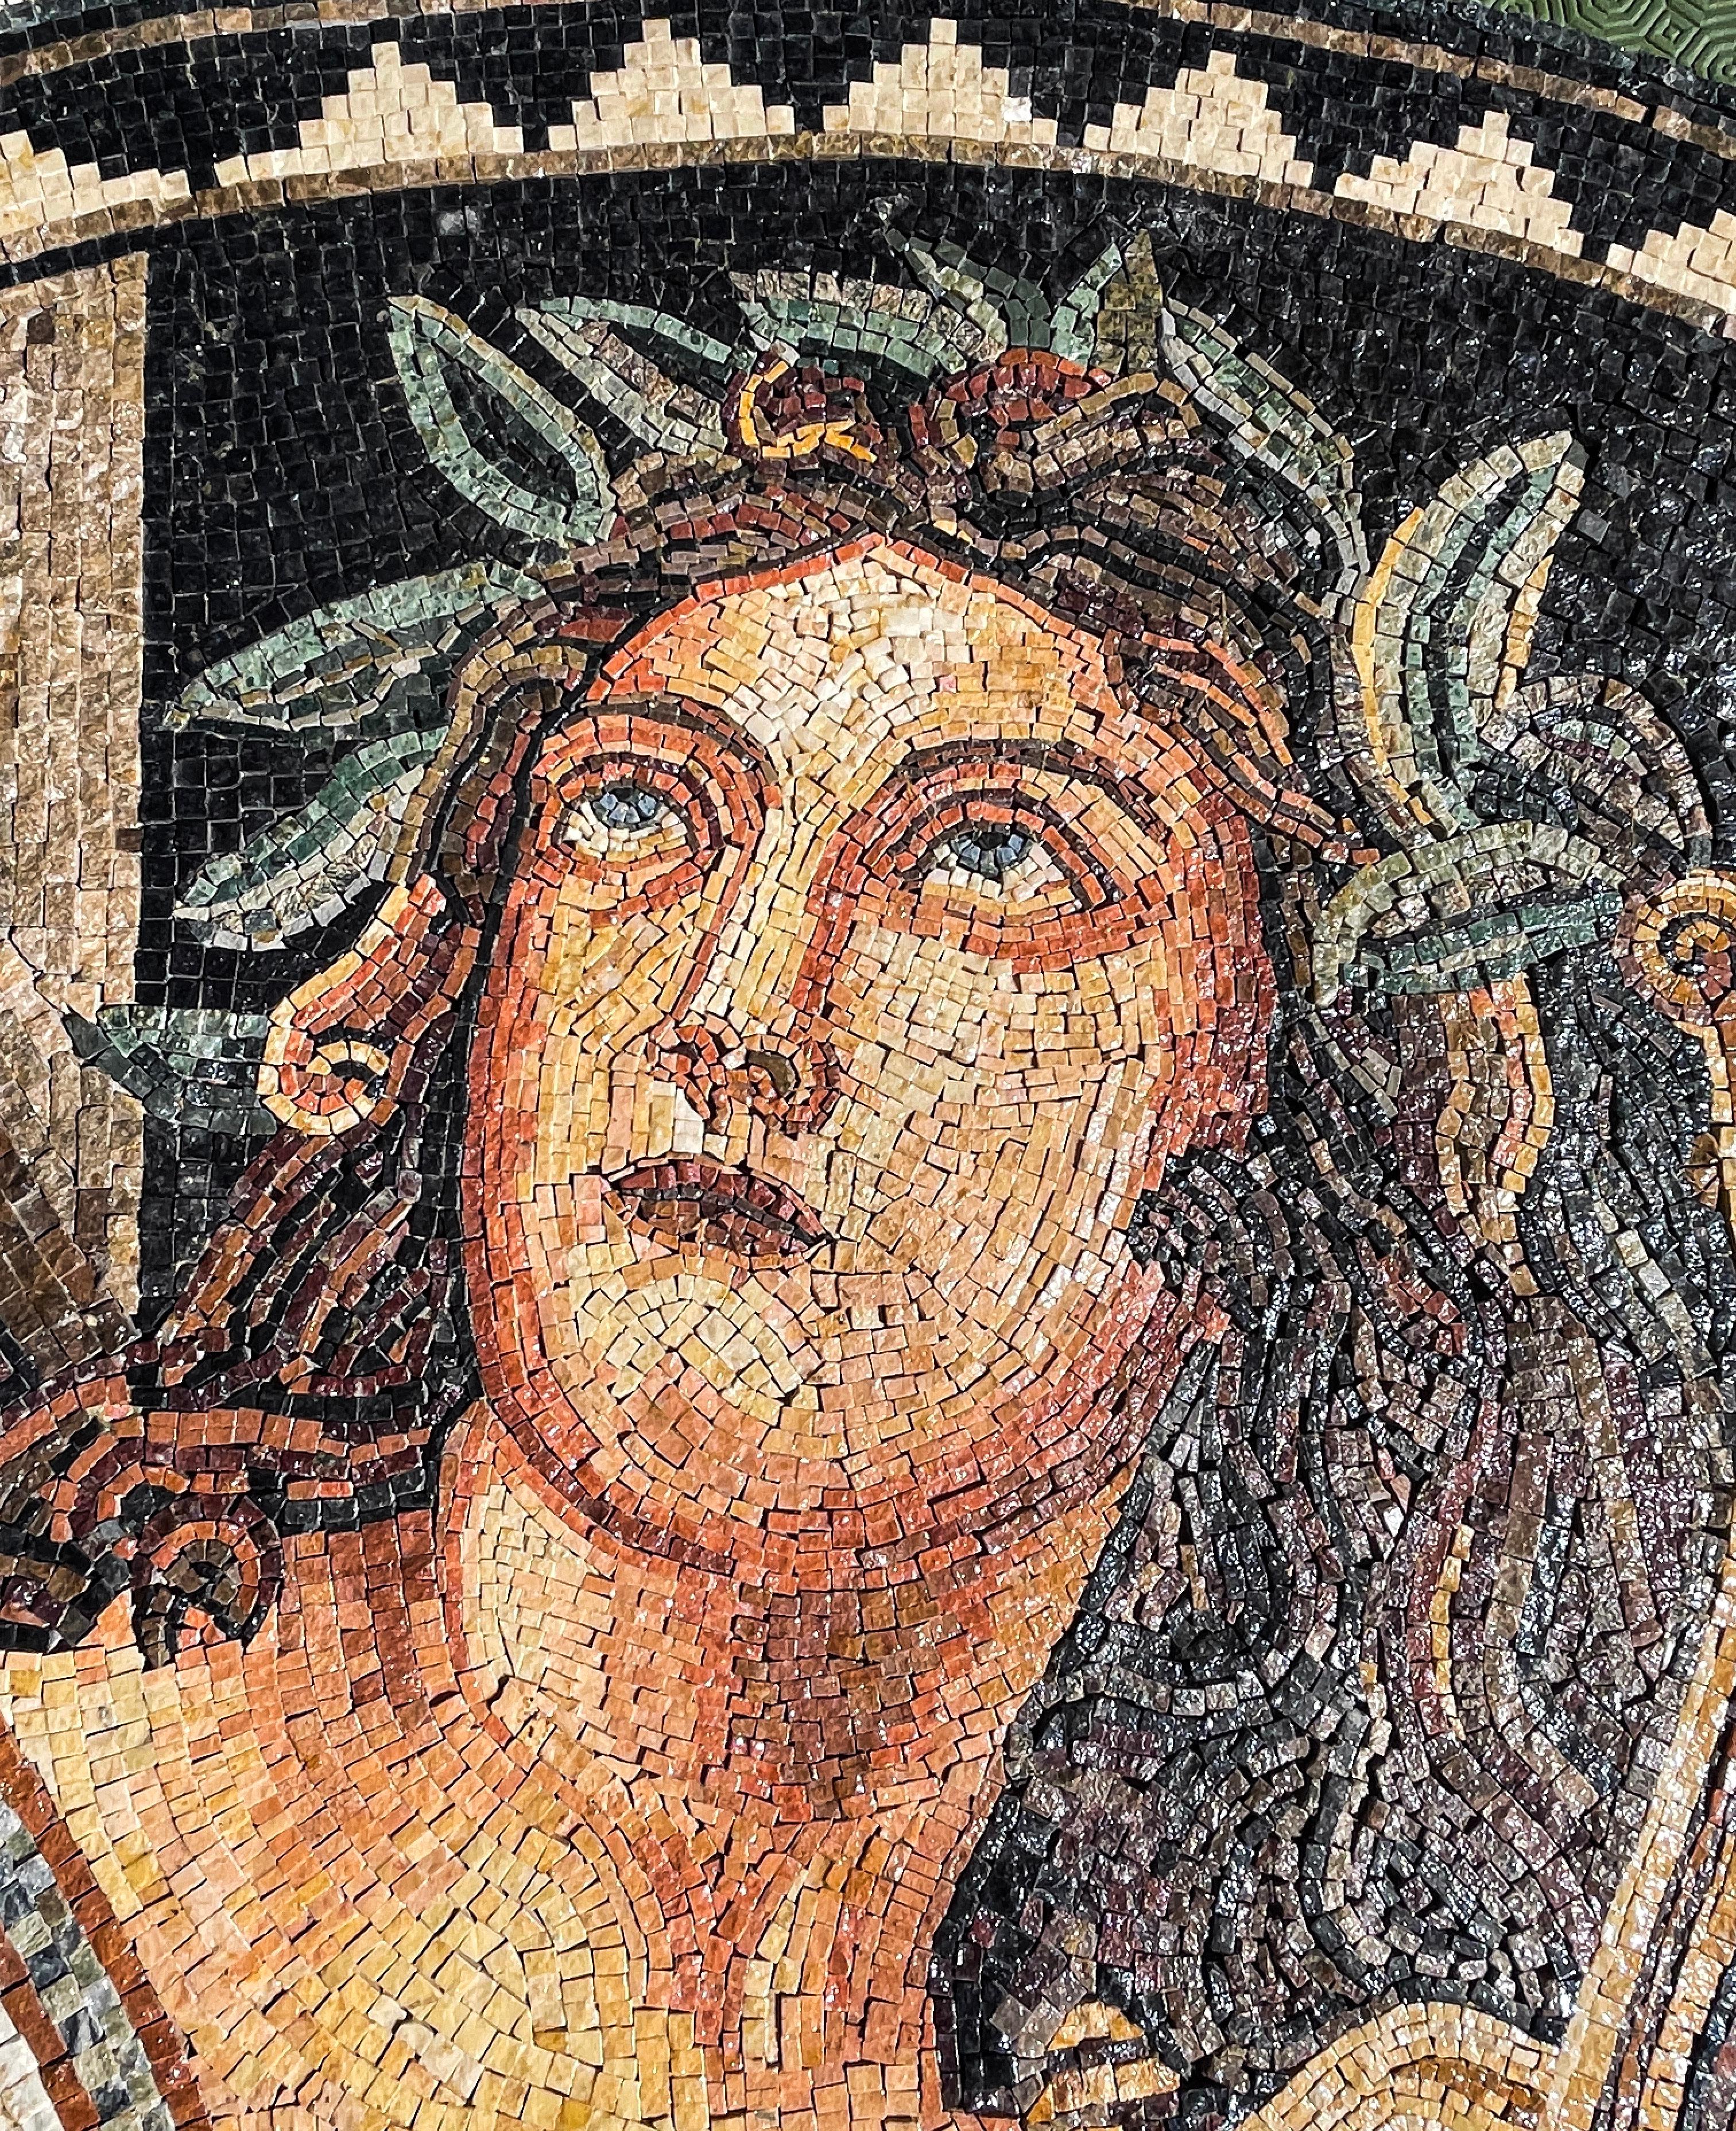 Stunning Roman Mosaic style, goddess playing the harp, circa 1950. This stunning mosaic represent a goddess playing the hard, it is hard to date but it looks like it's a mid century work trying to represent the roman style and work of the true Roman